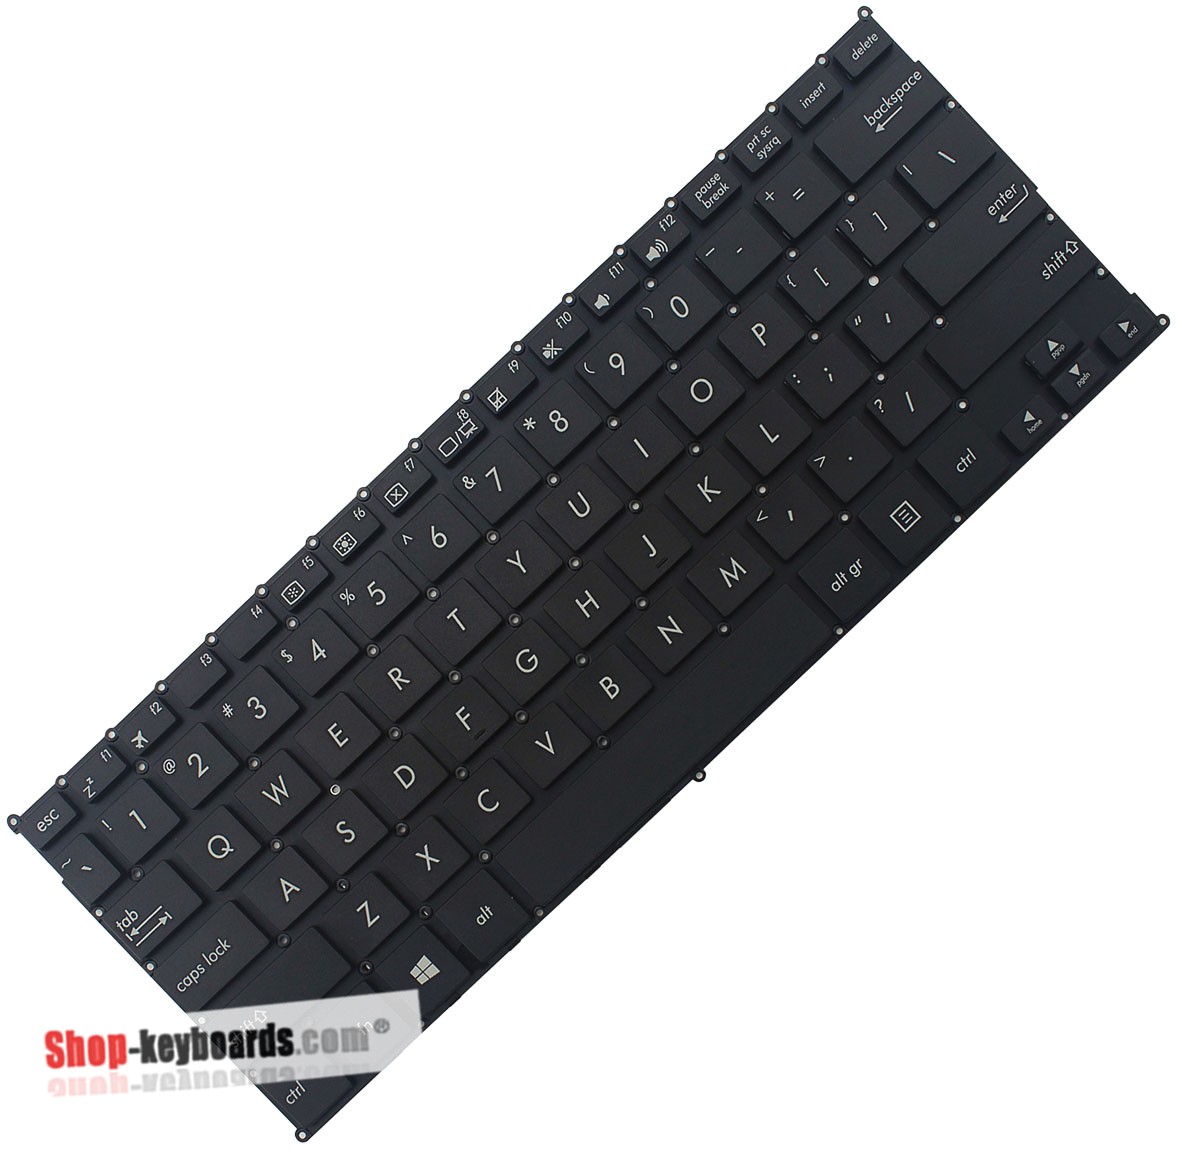 Asus 0KNL0-1120AR00 Keyboard replacement